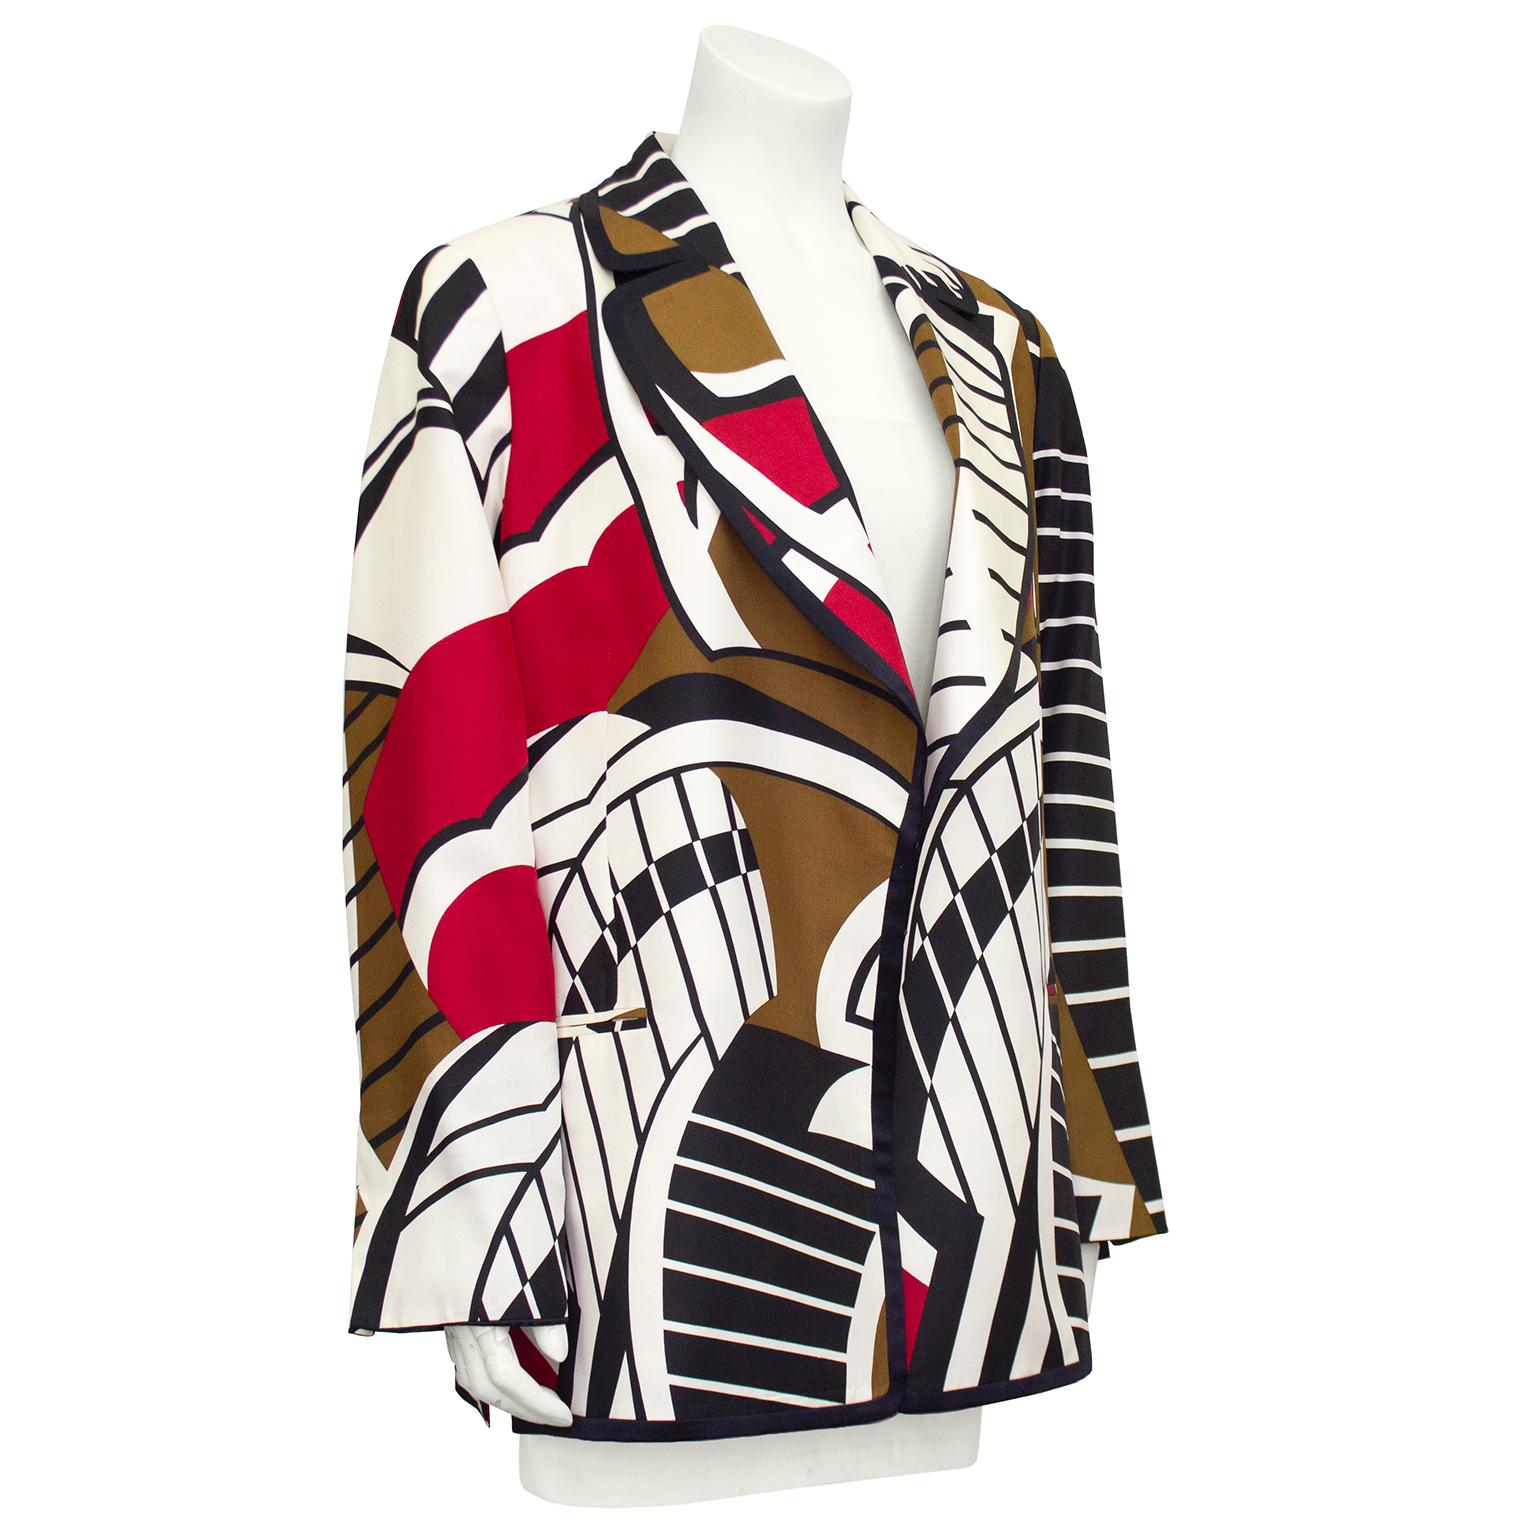 1990s Gianfranco Ferre white, brown, black and deep red graphic and abstract geometric silk blazer. Notched collar, hook and eye closures, faux horizontal slit pockets and side slits. Black satin trim. Hem of sleeves is lined in matching black satin